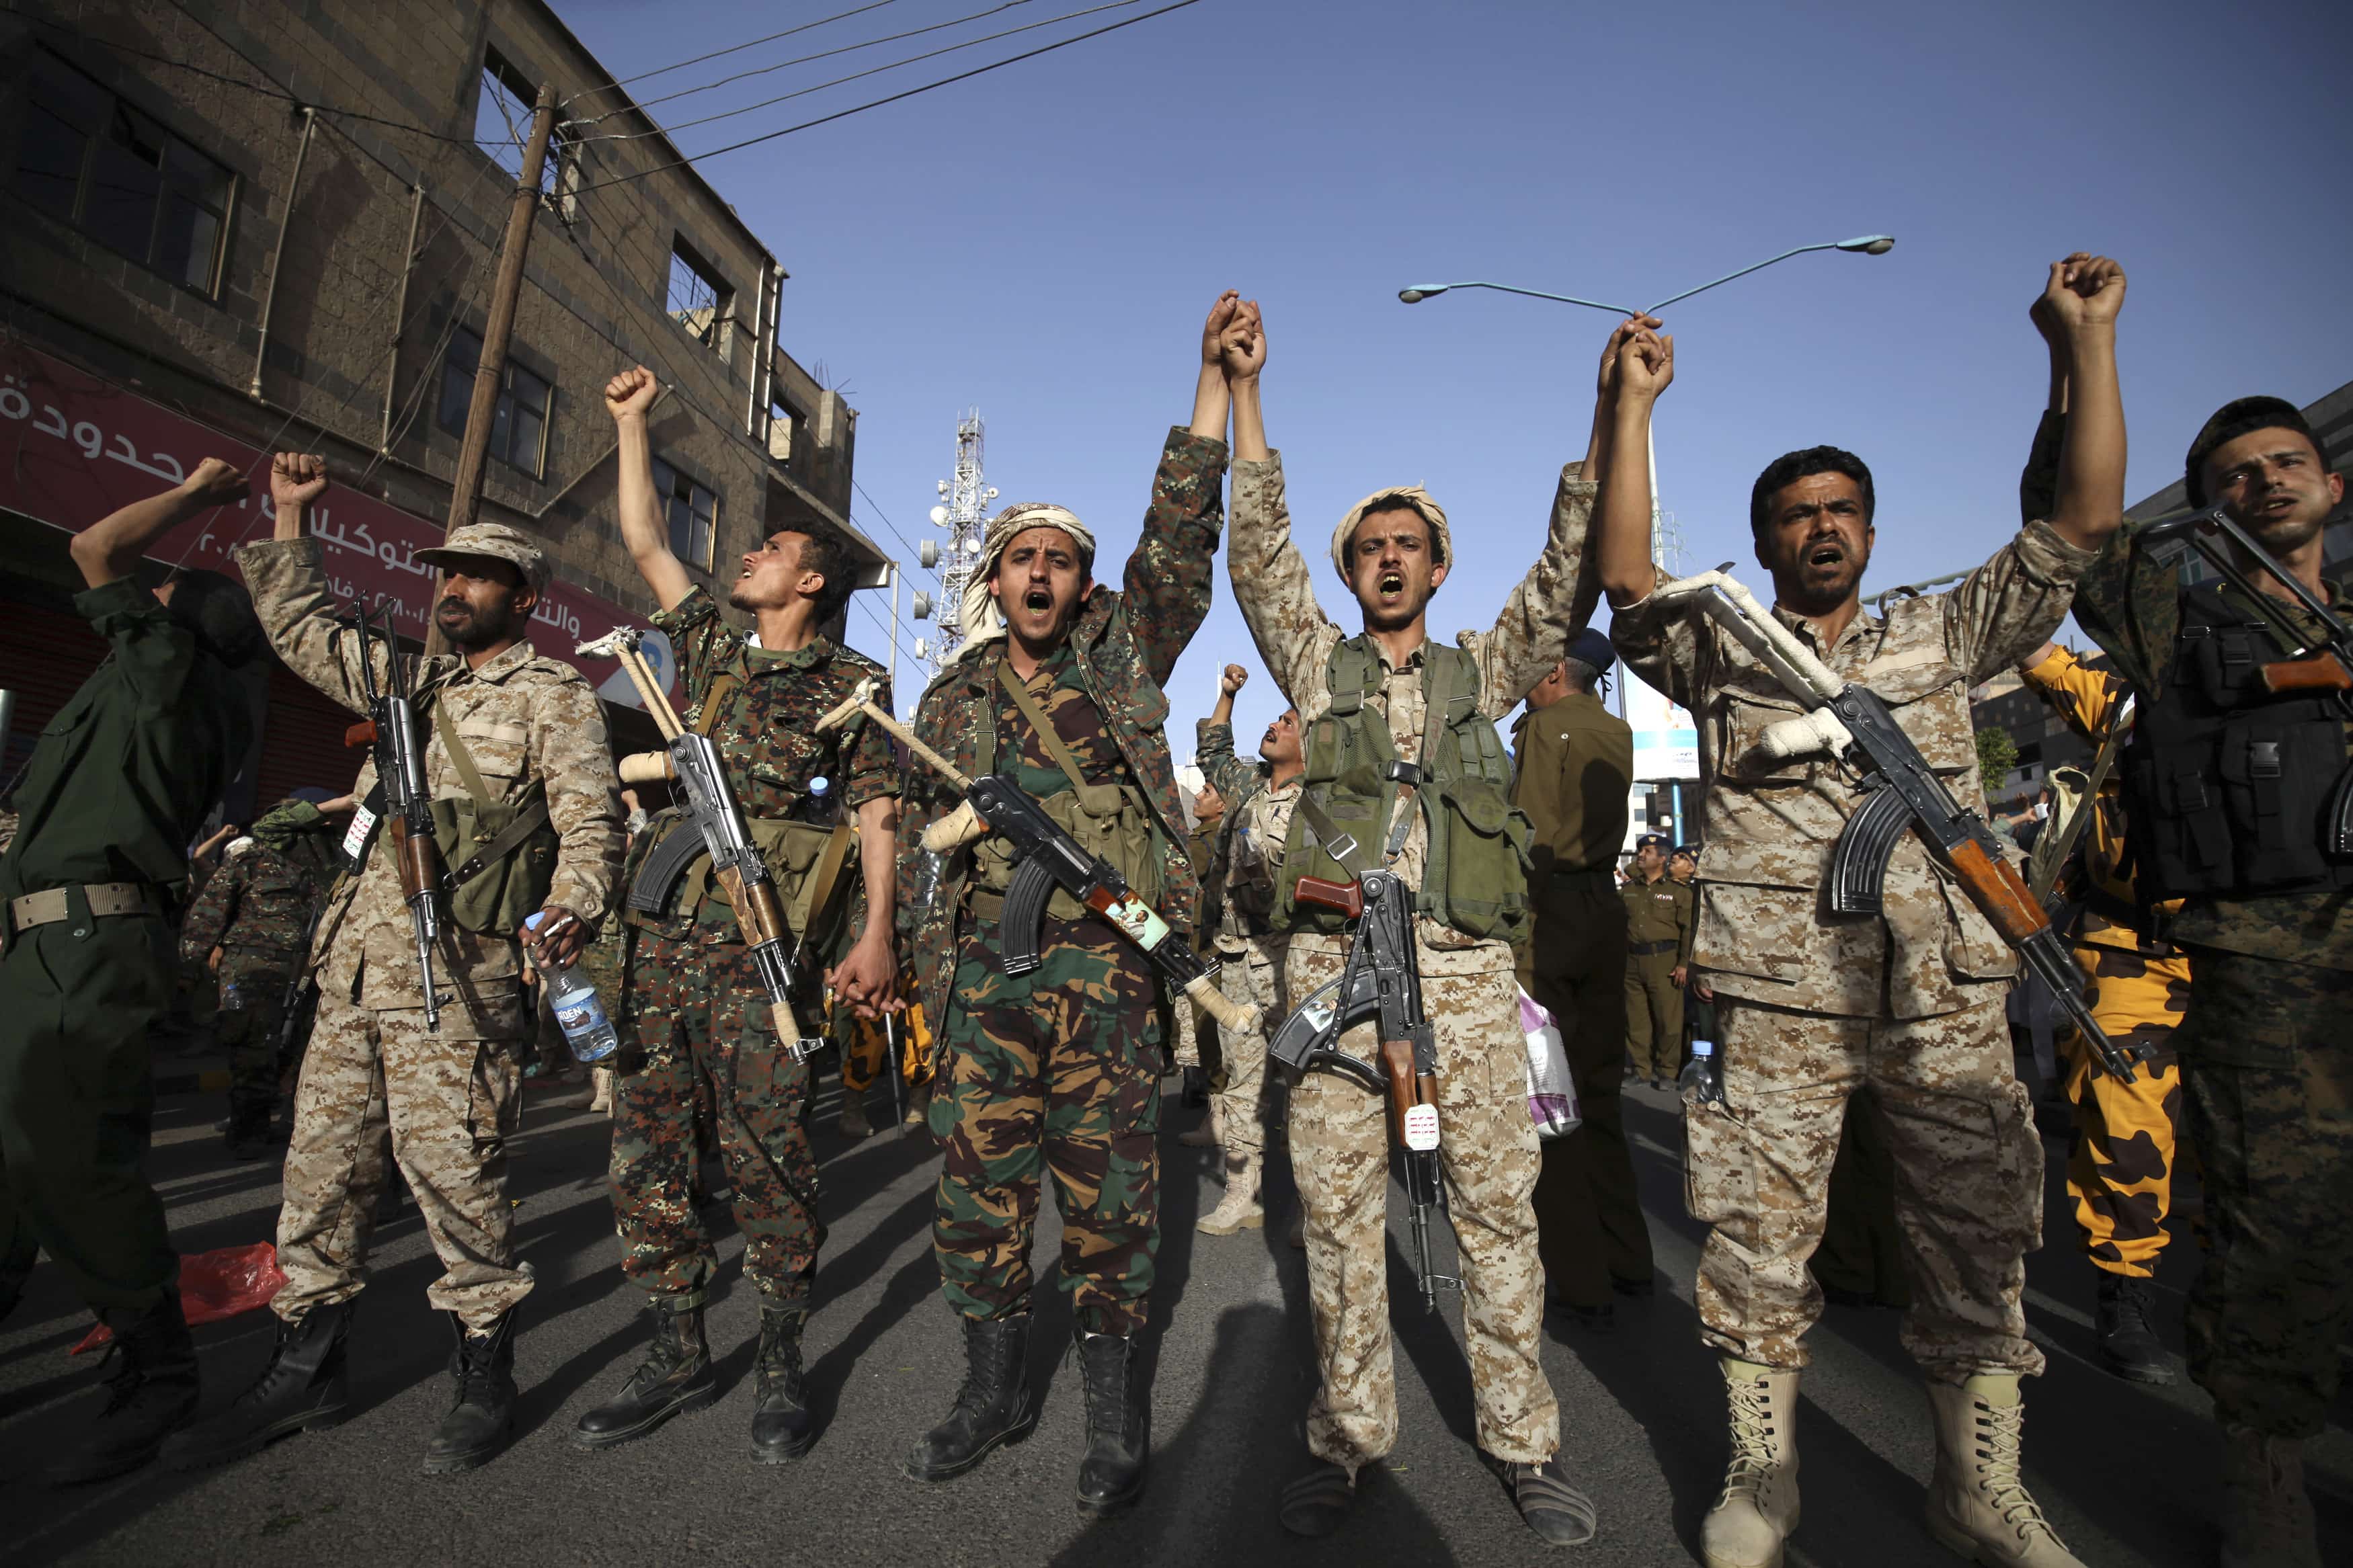 Houthi fighters in army uniform shout slogans during a demonstration to show support to the movement, and rejecting foreign interference in Yemen's internal affairs, in Sanaa on 27 February 2015, REUTERS/Mohamed al-Sayaghi